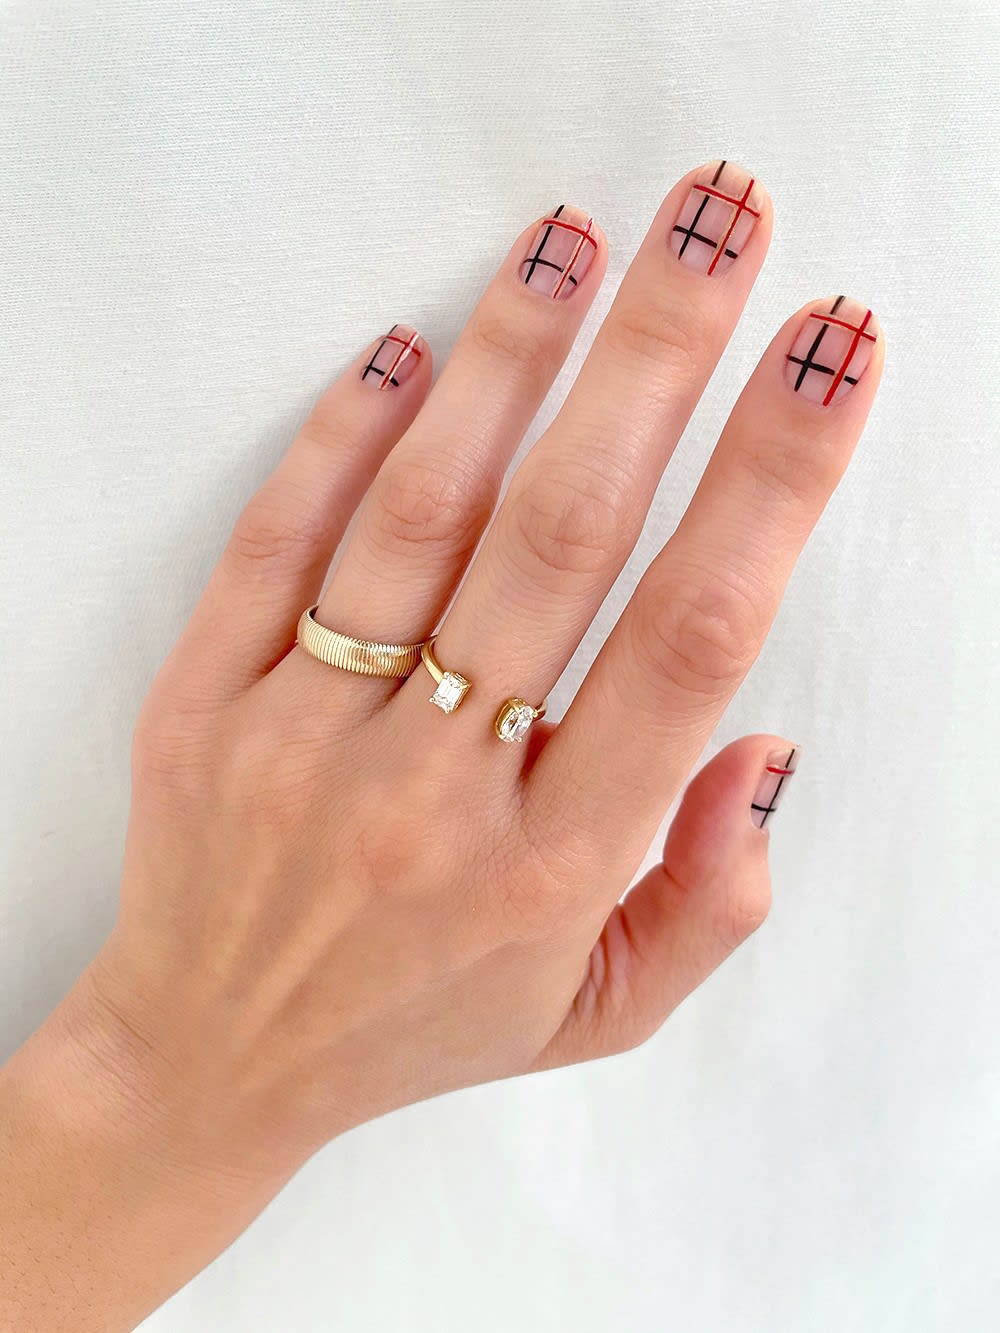 red, black, and gold plaid nails for holiday on a hand wearing gold rings